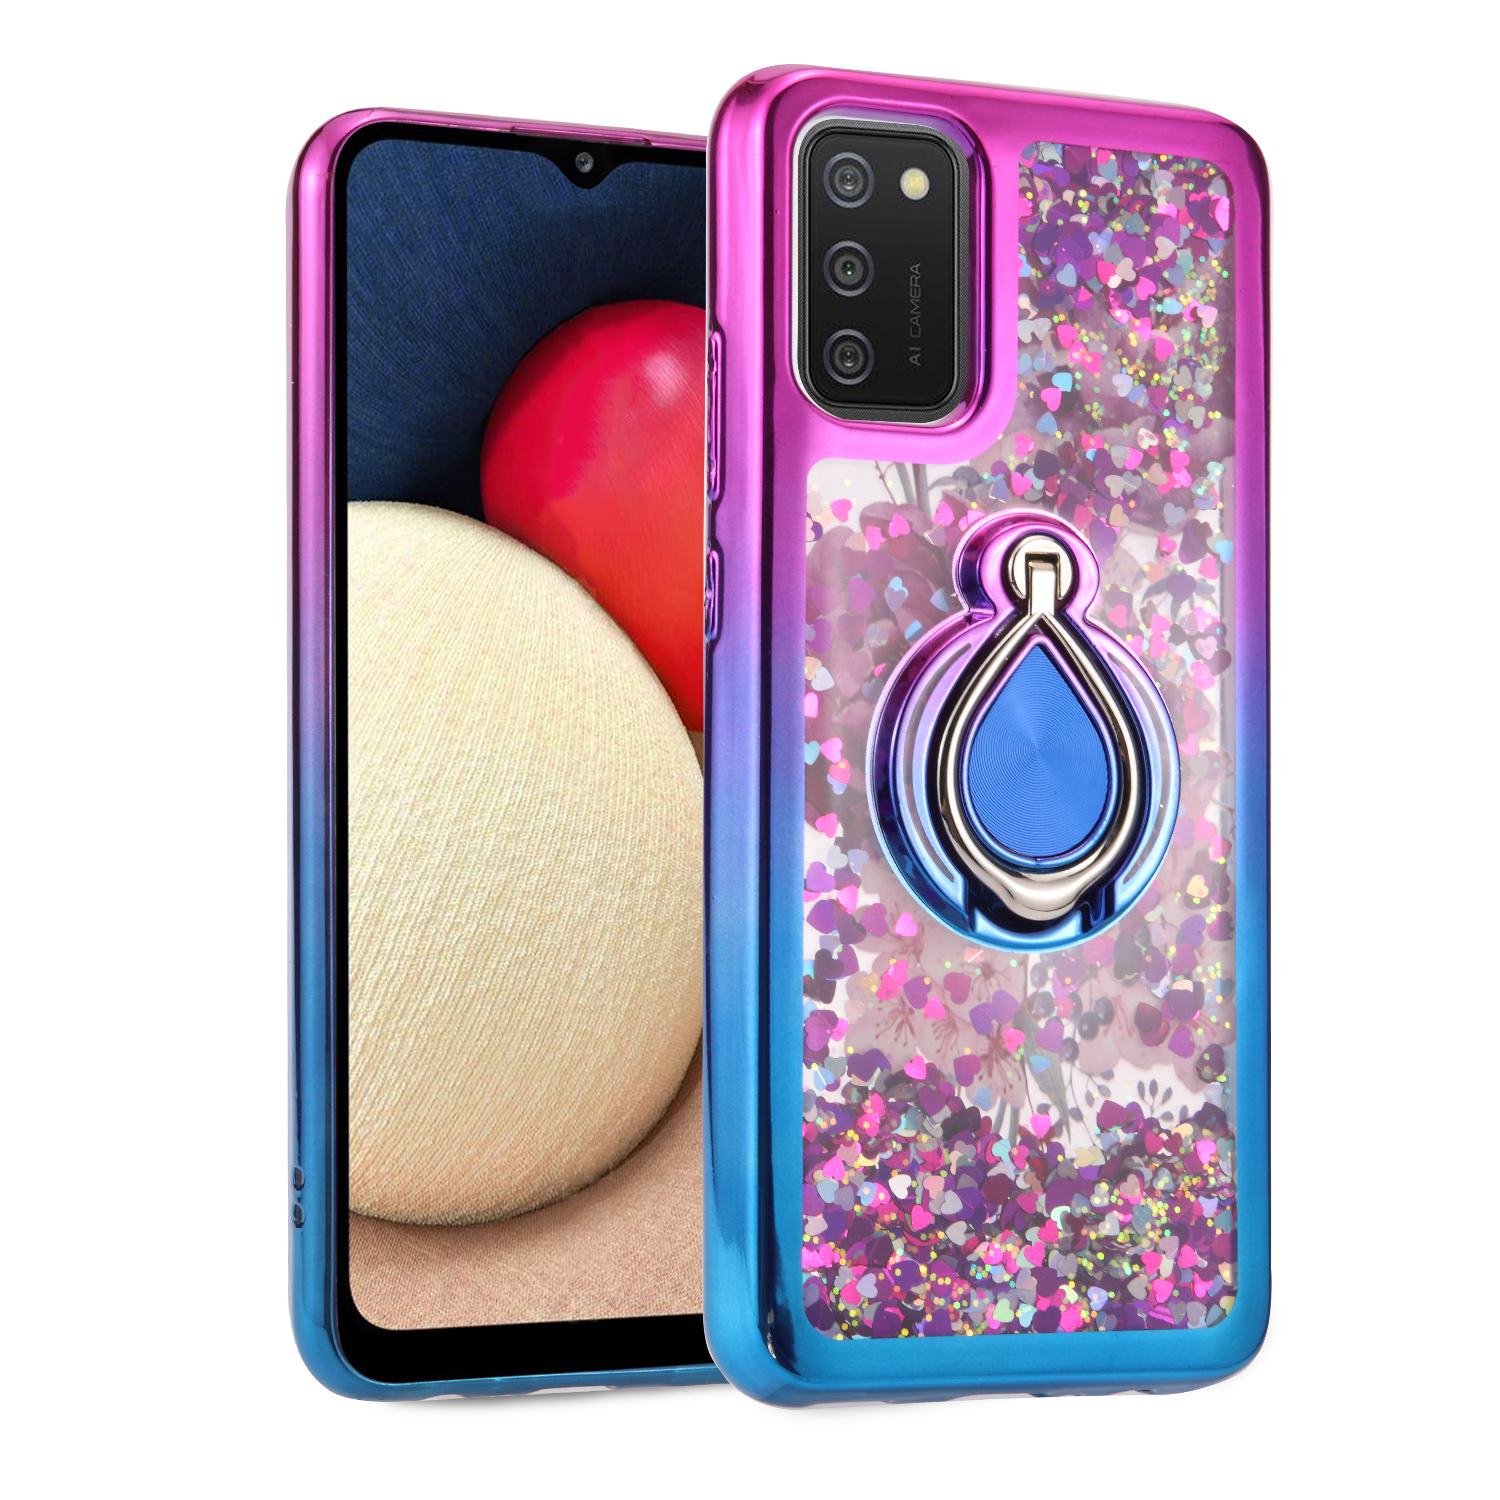 Liquid Star Dust Glitter Dual Color Hybrid Protective Armor RING Case Cover for Samsung Galaxy